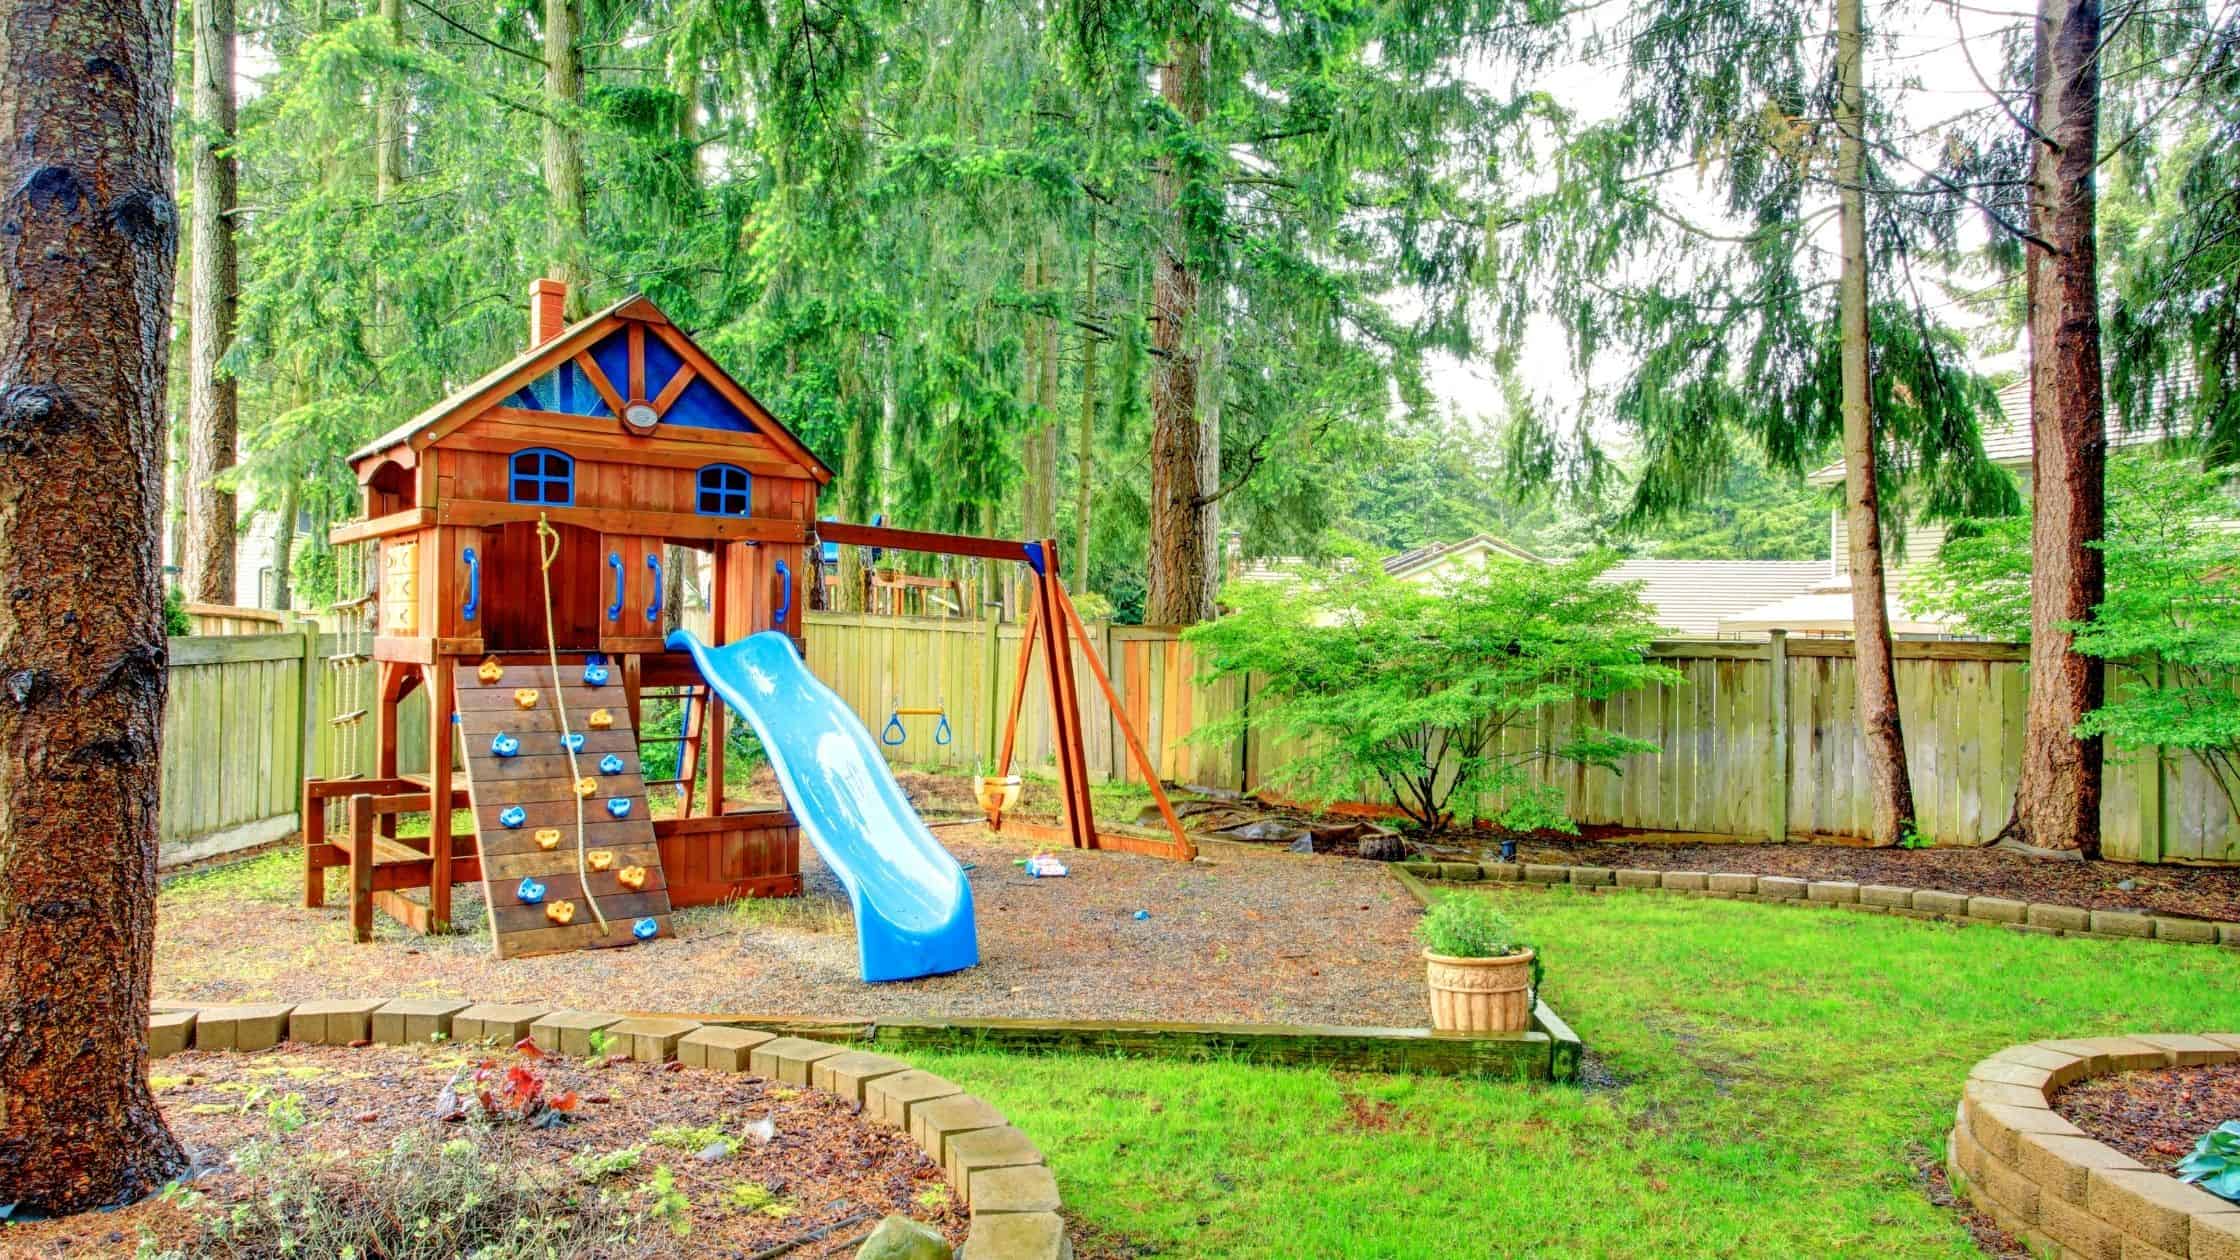 a fun playground set in a backyard of a home